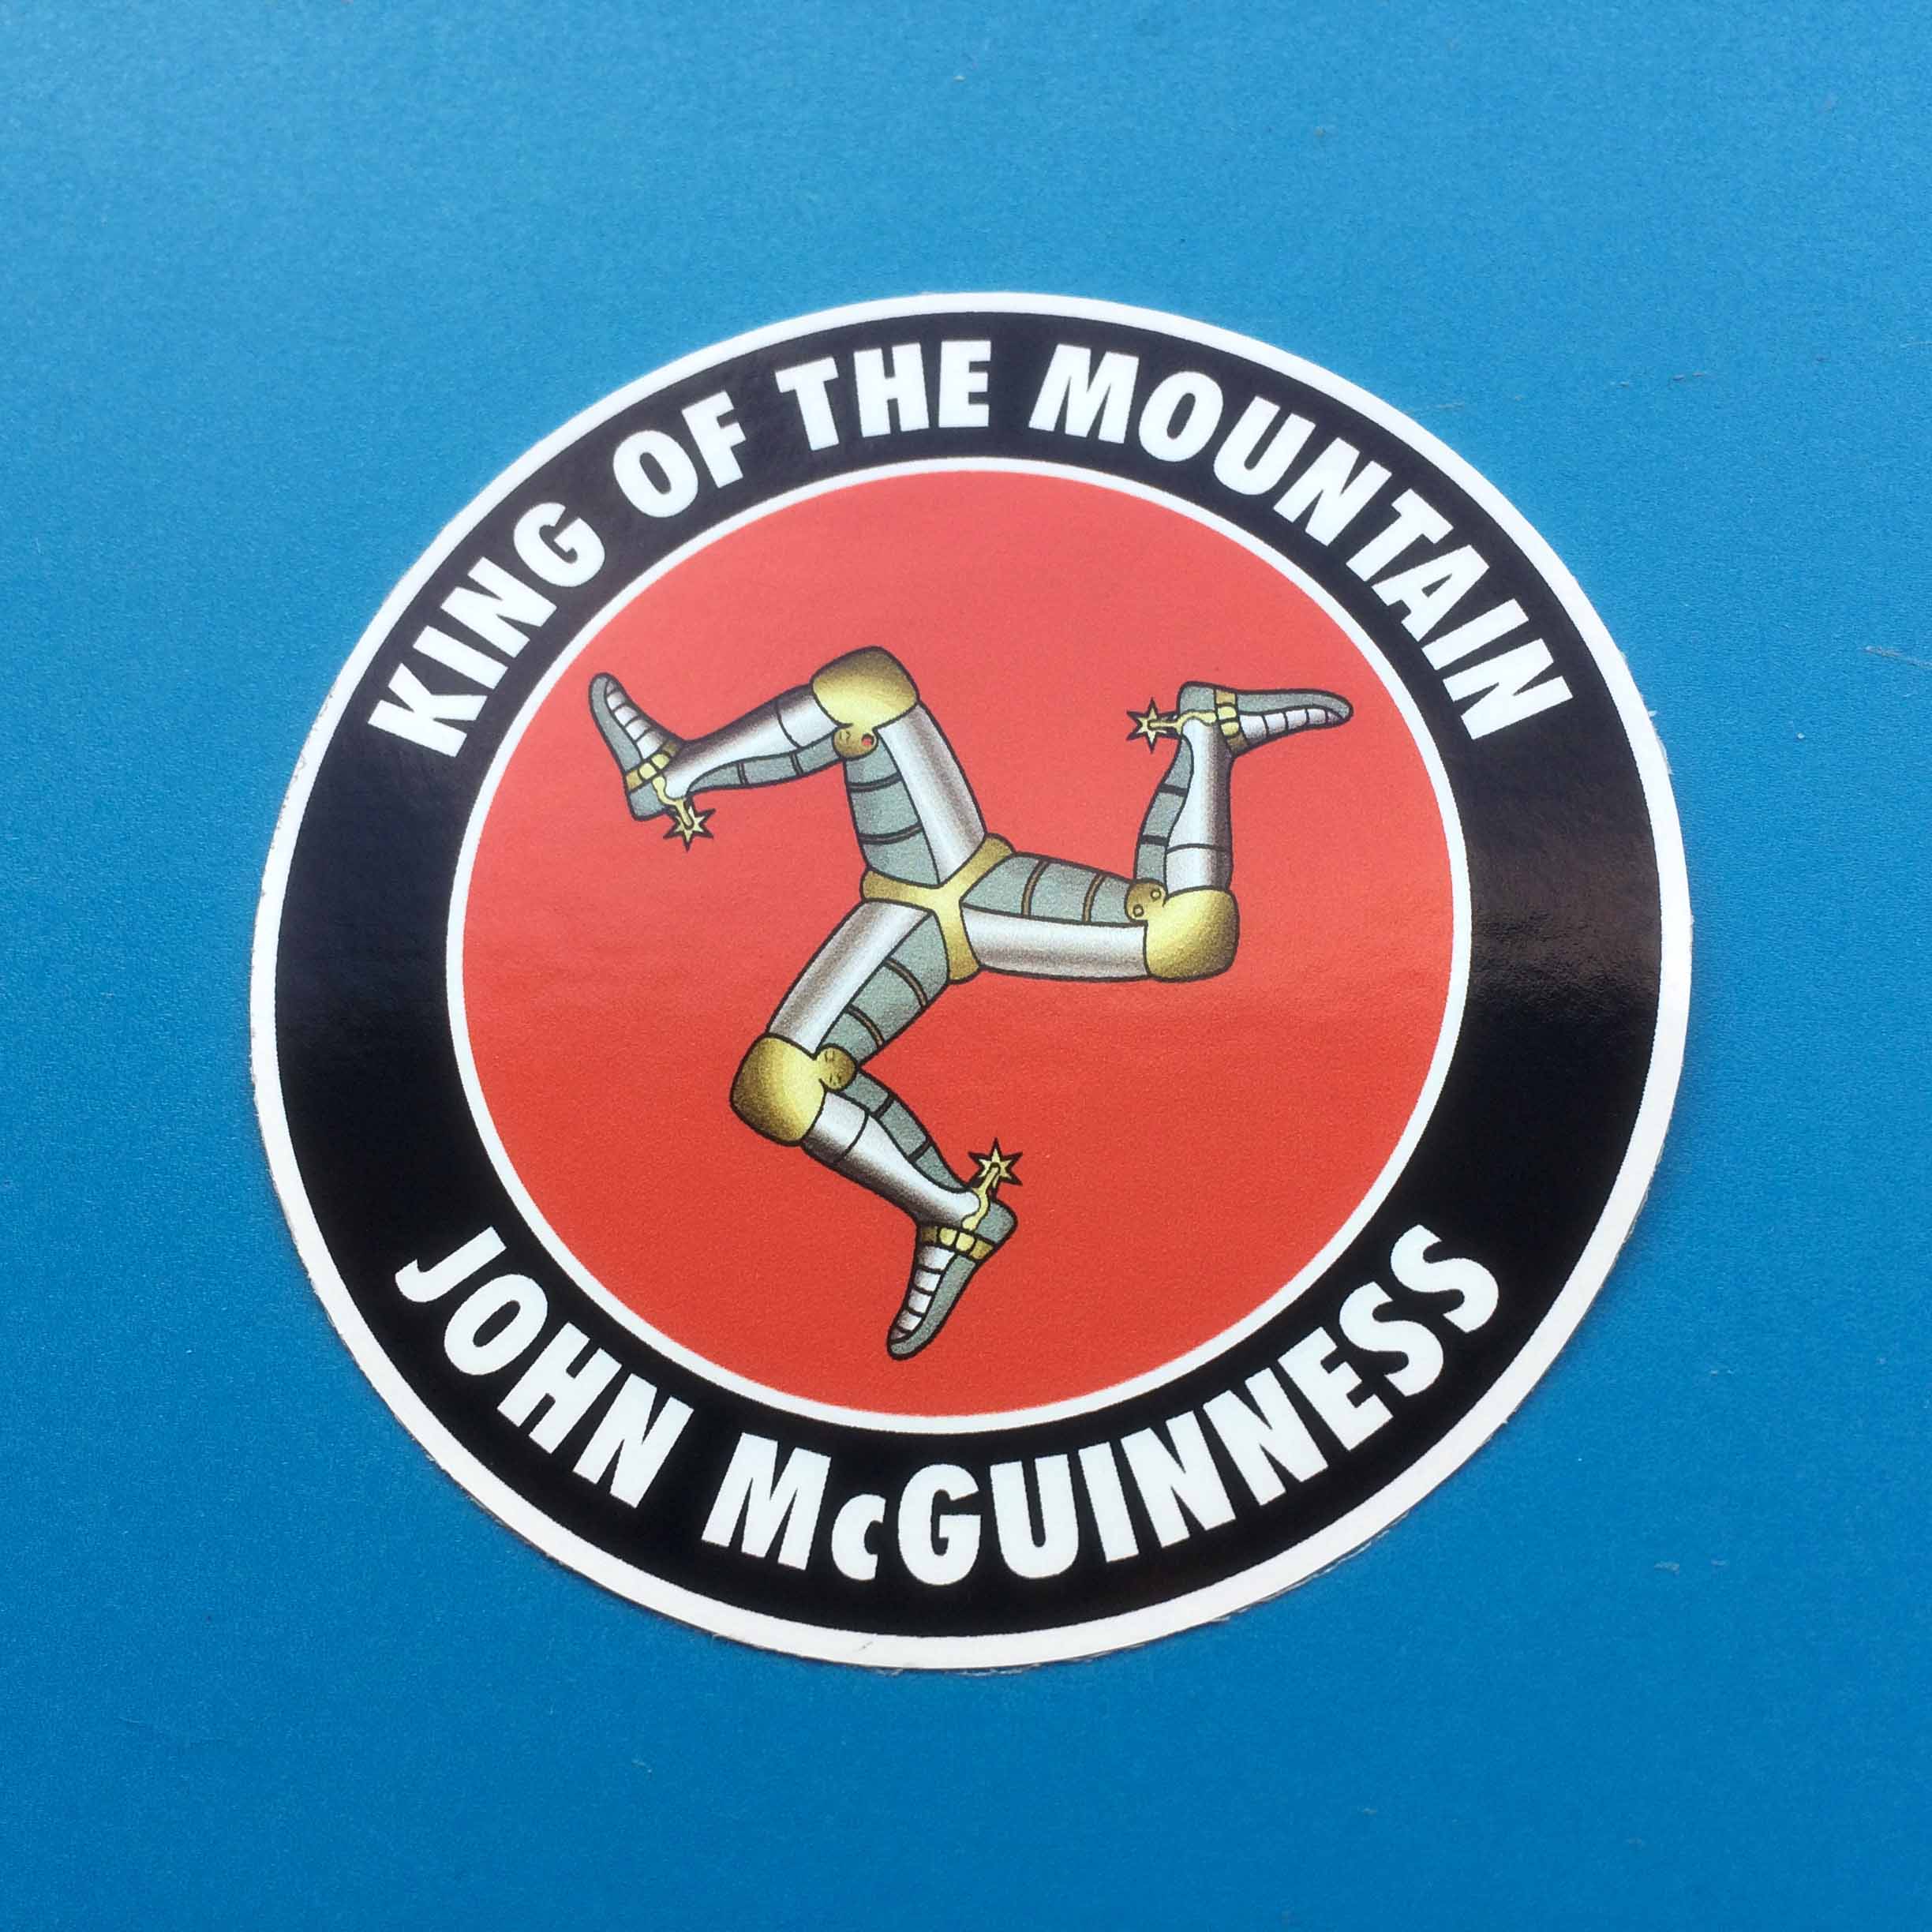 JOHN MCGUINESS KING OF THE MOUNTAIN STICKER. King Of The Mountain John McGuiness in white lettering on a black outer circle. A red inner circle contains three armoured legs with golden spurs.